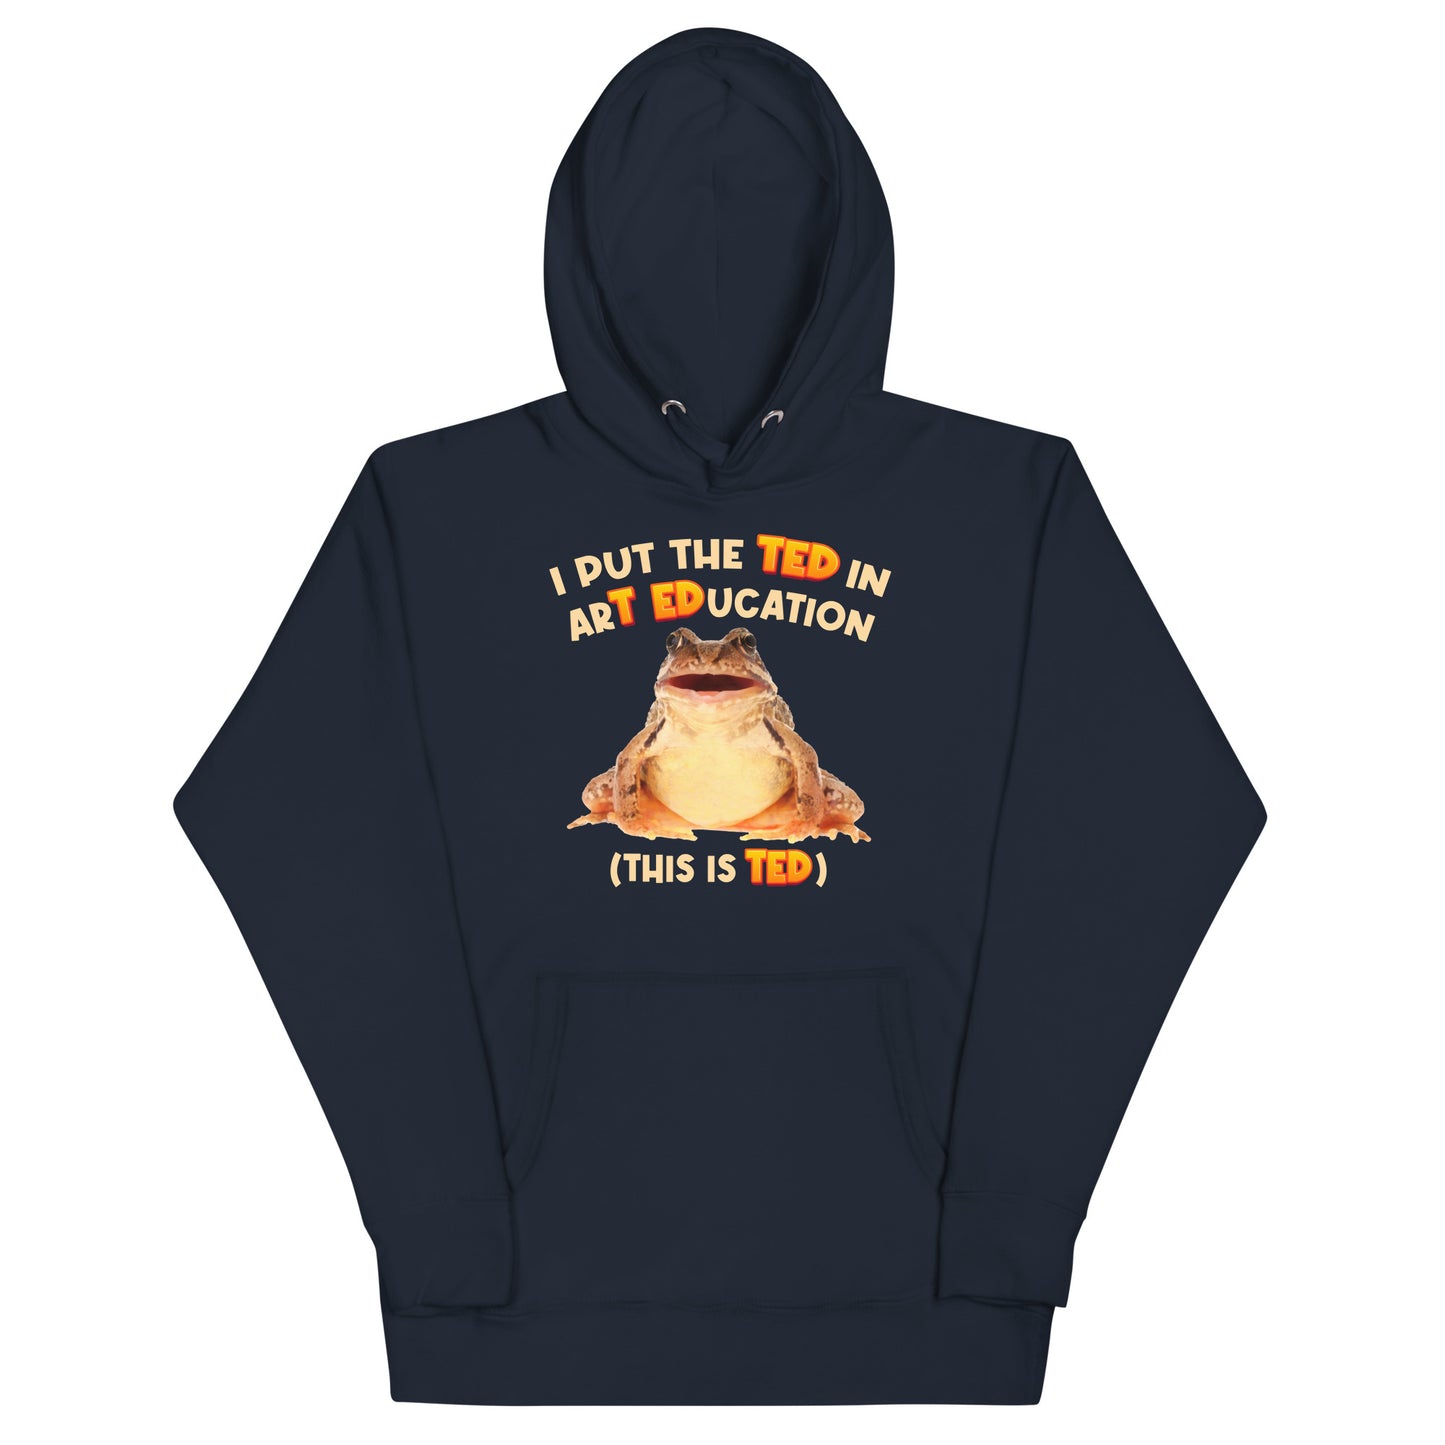 I Put the TED in arT EDucation Unisex Hoodie